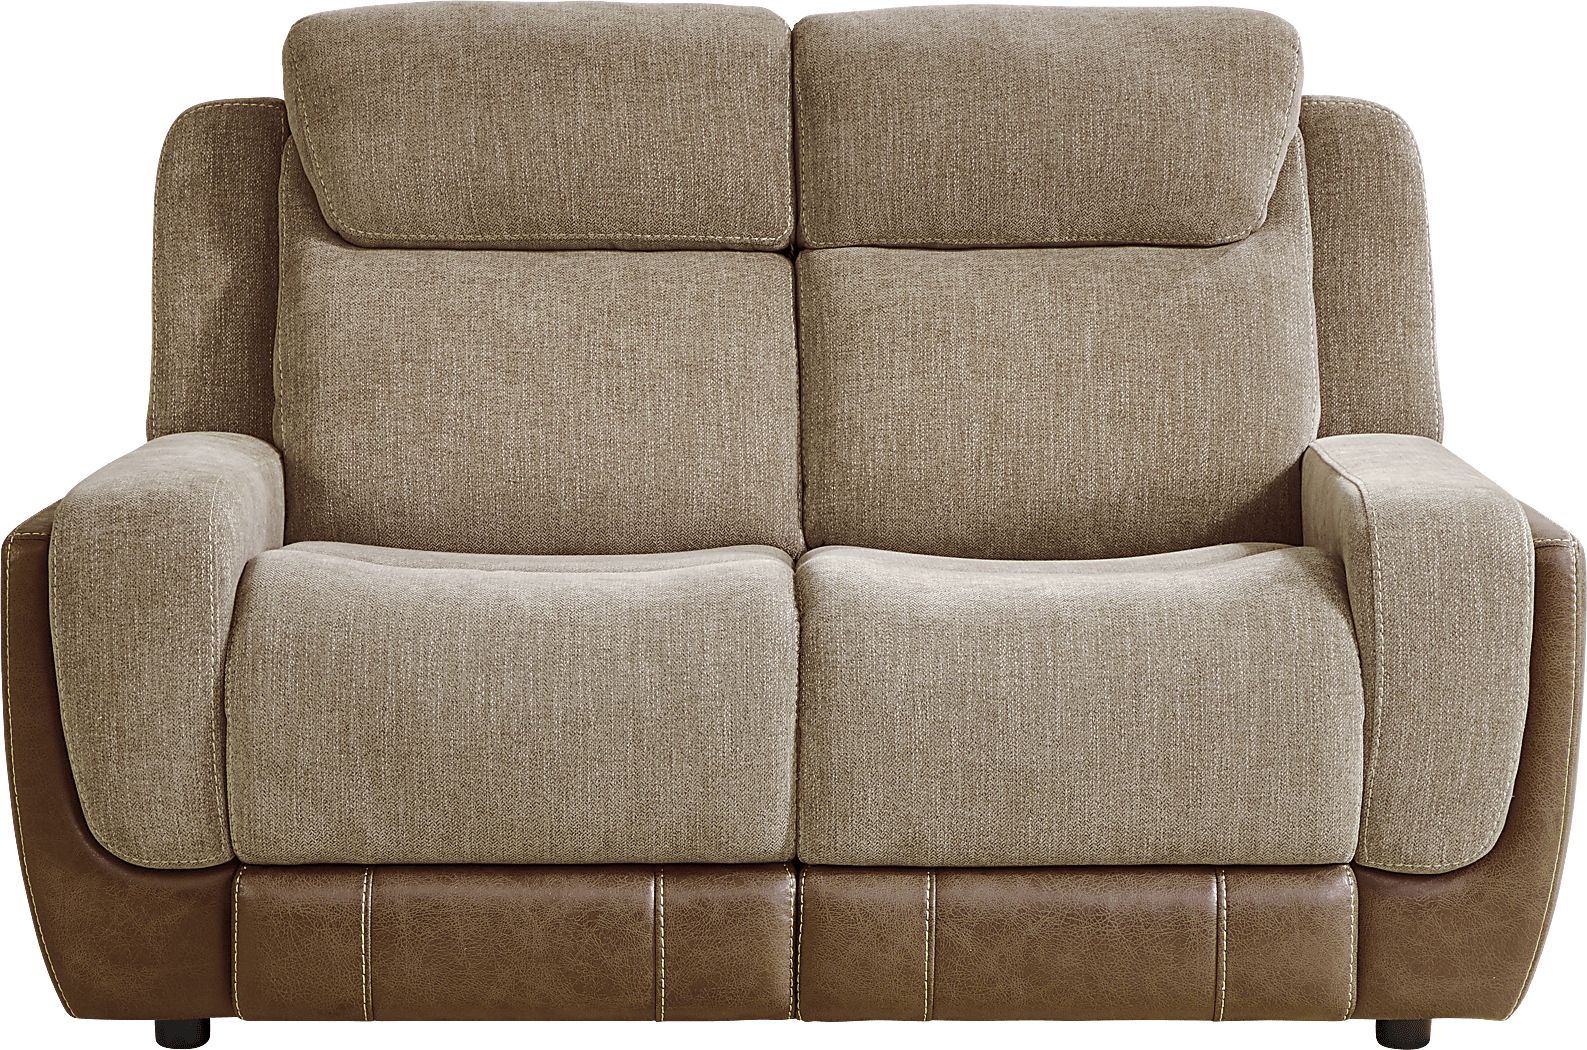 State Street Camel 7 Pc Living Room with Reclining Sofa